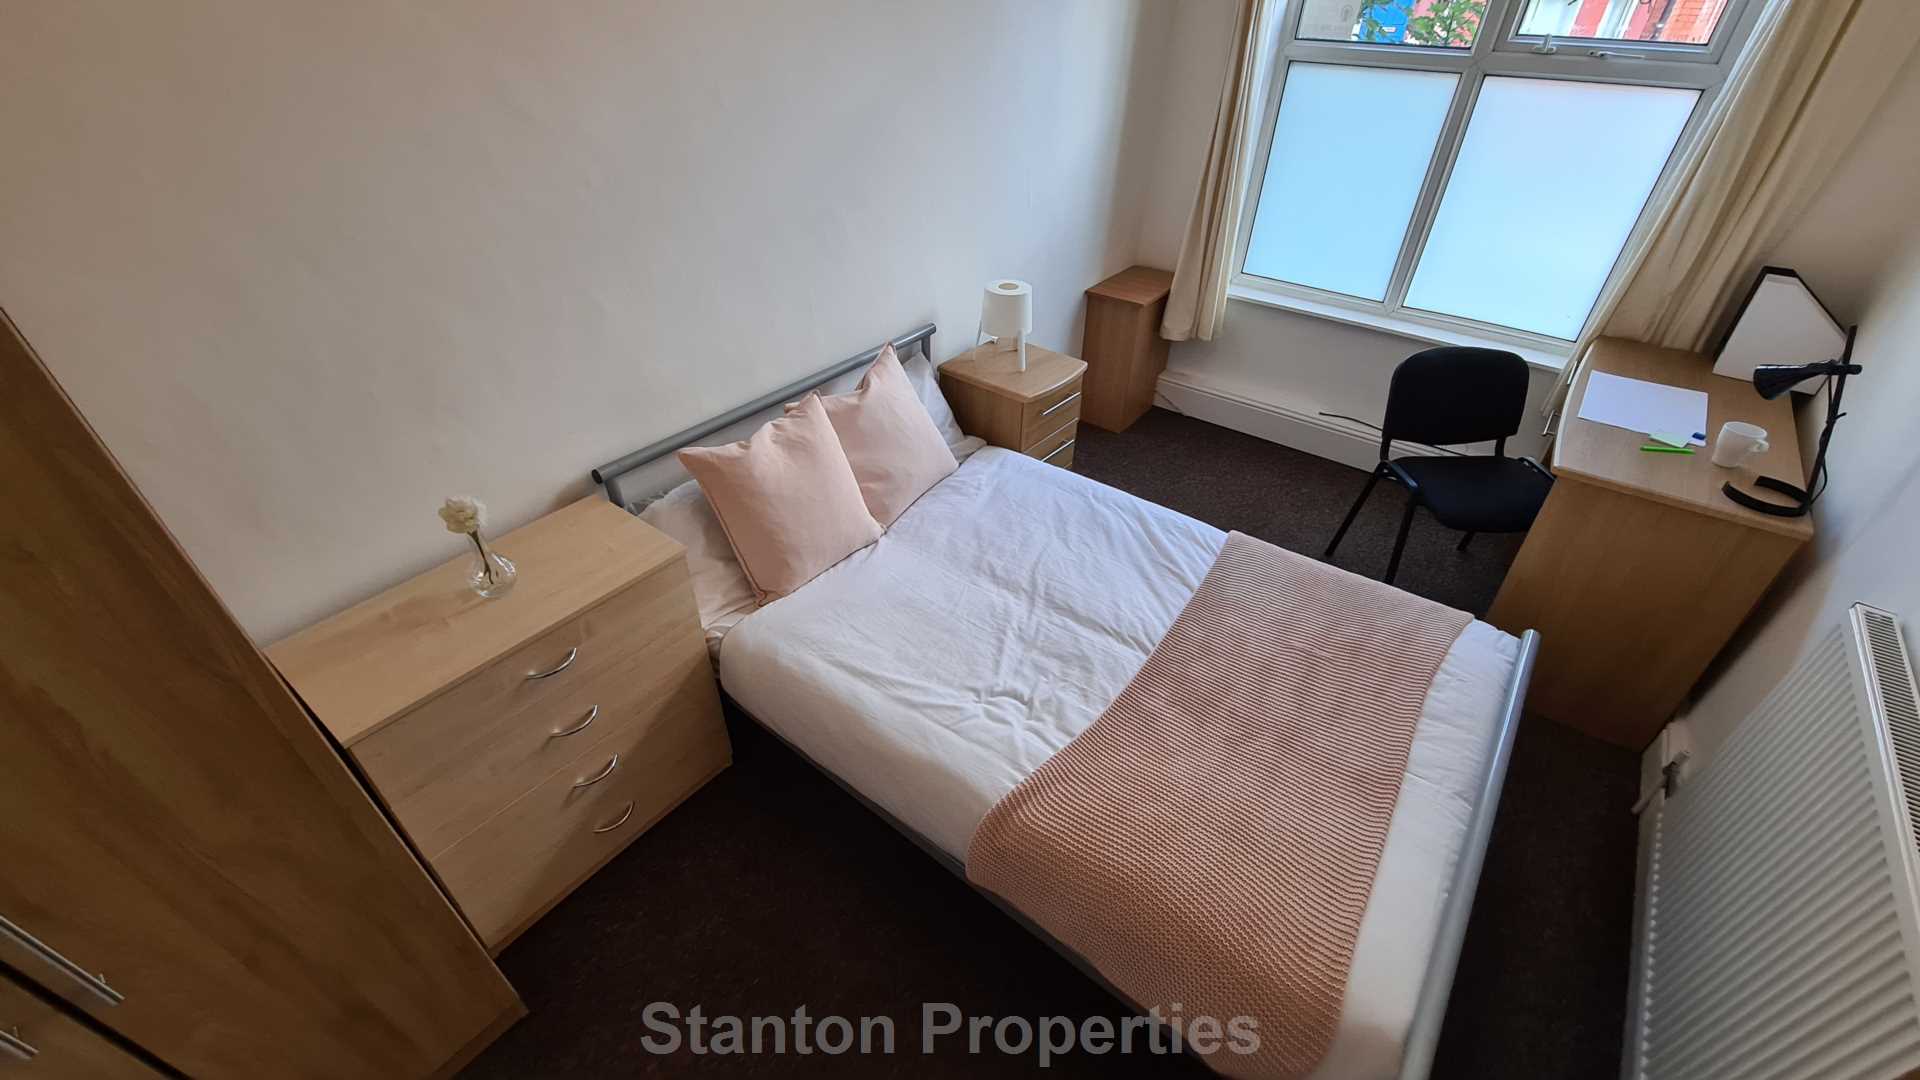 See Video Tour, £130 pppw, Albion Road, Manchester, Image 10